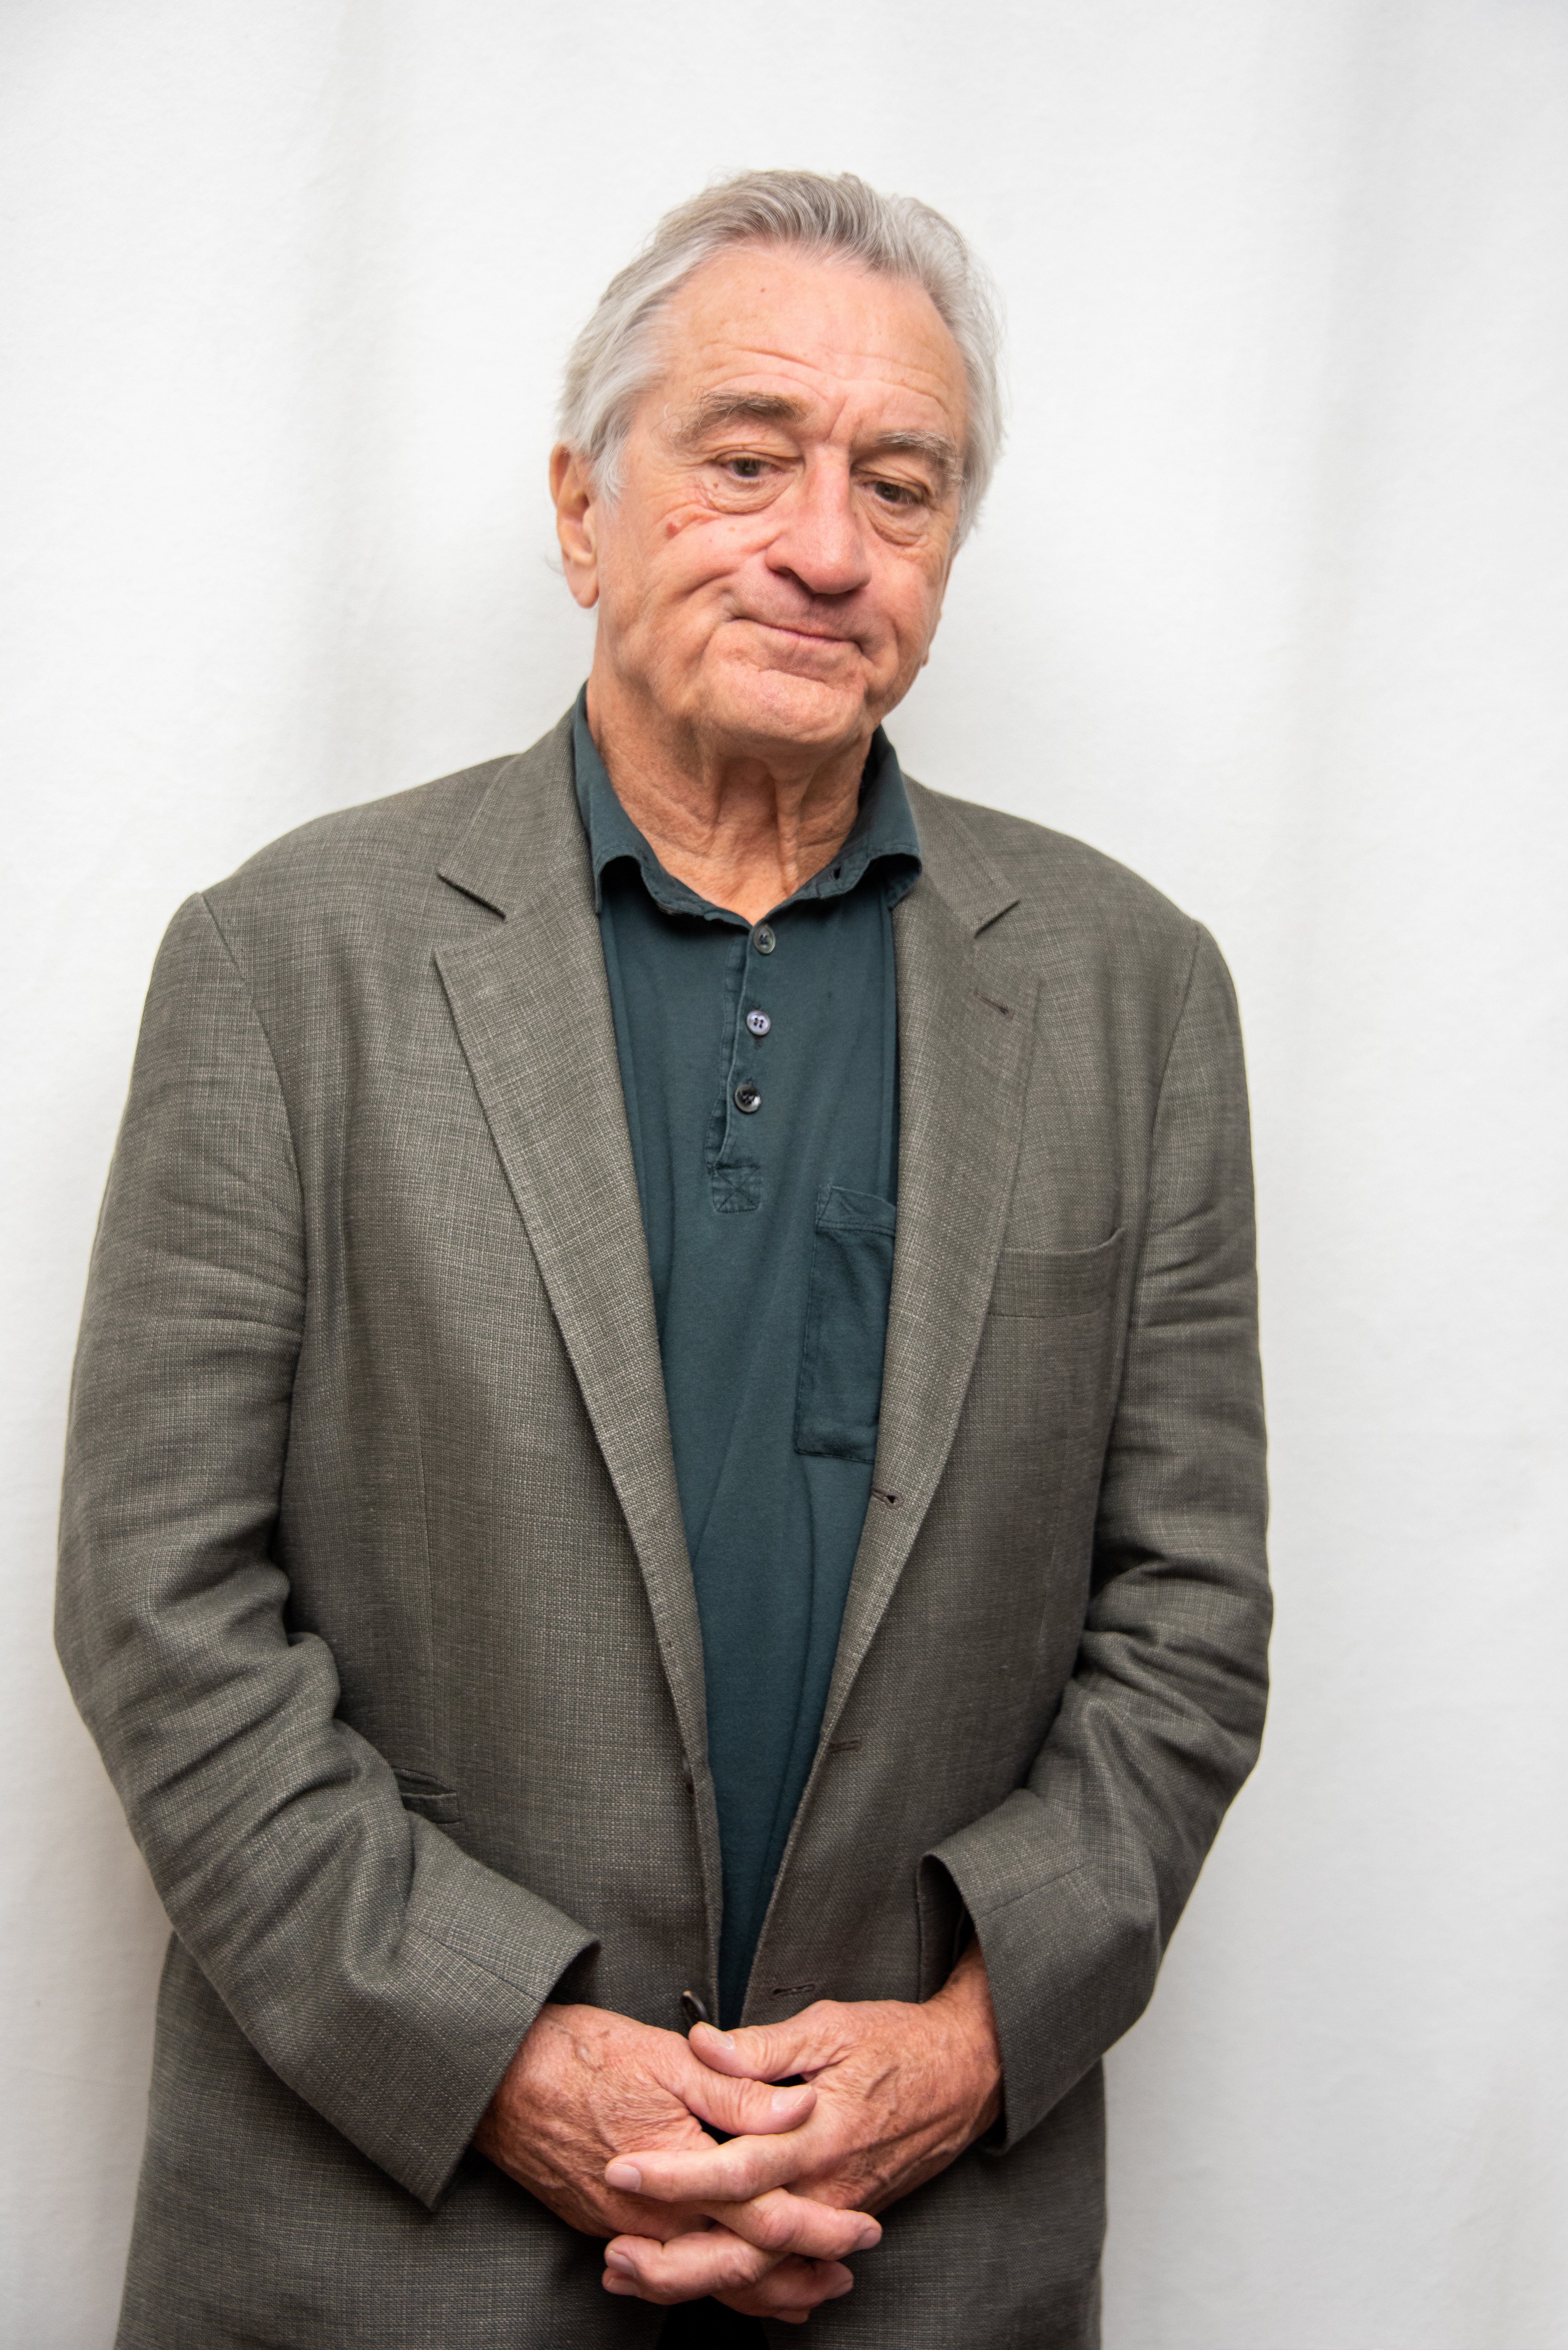 Robert De Niro at the press conference for "The Irishman" on October 25, 2019 | Source: Getty Images